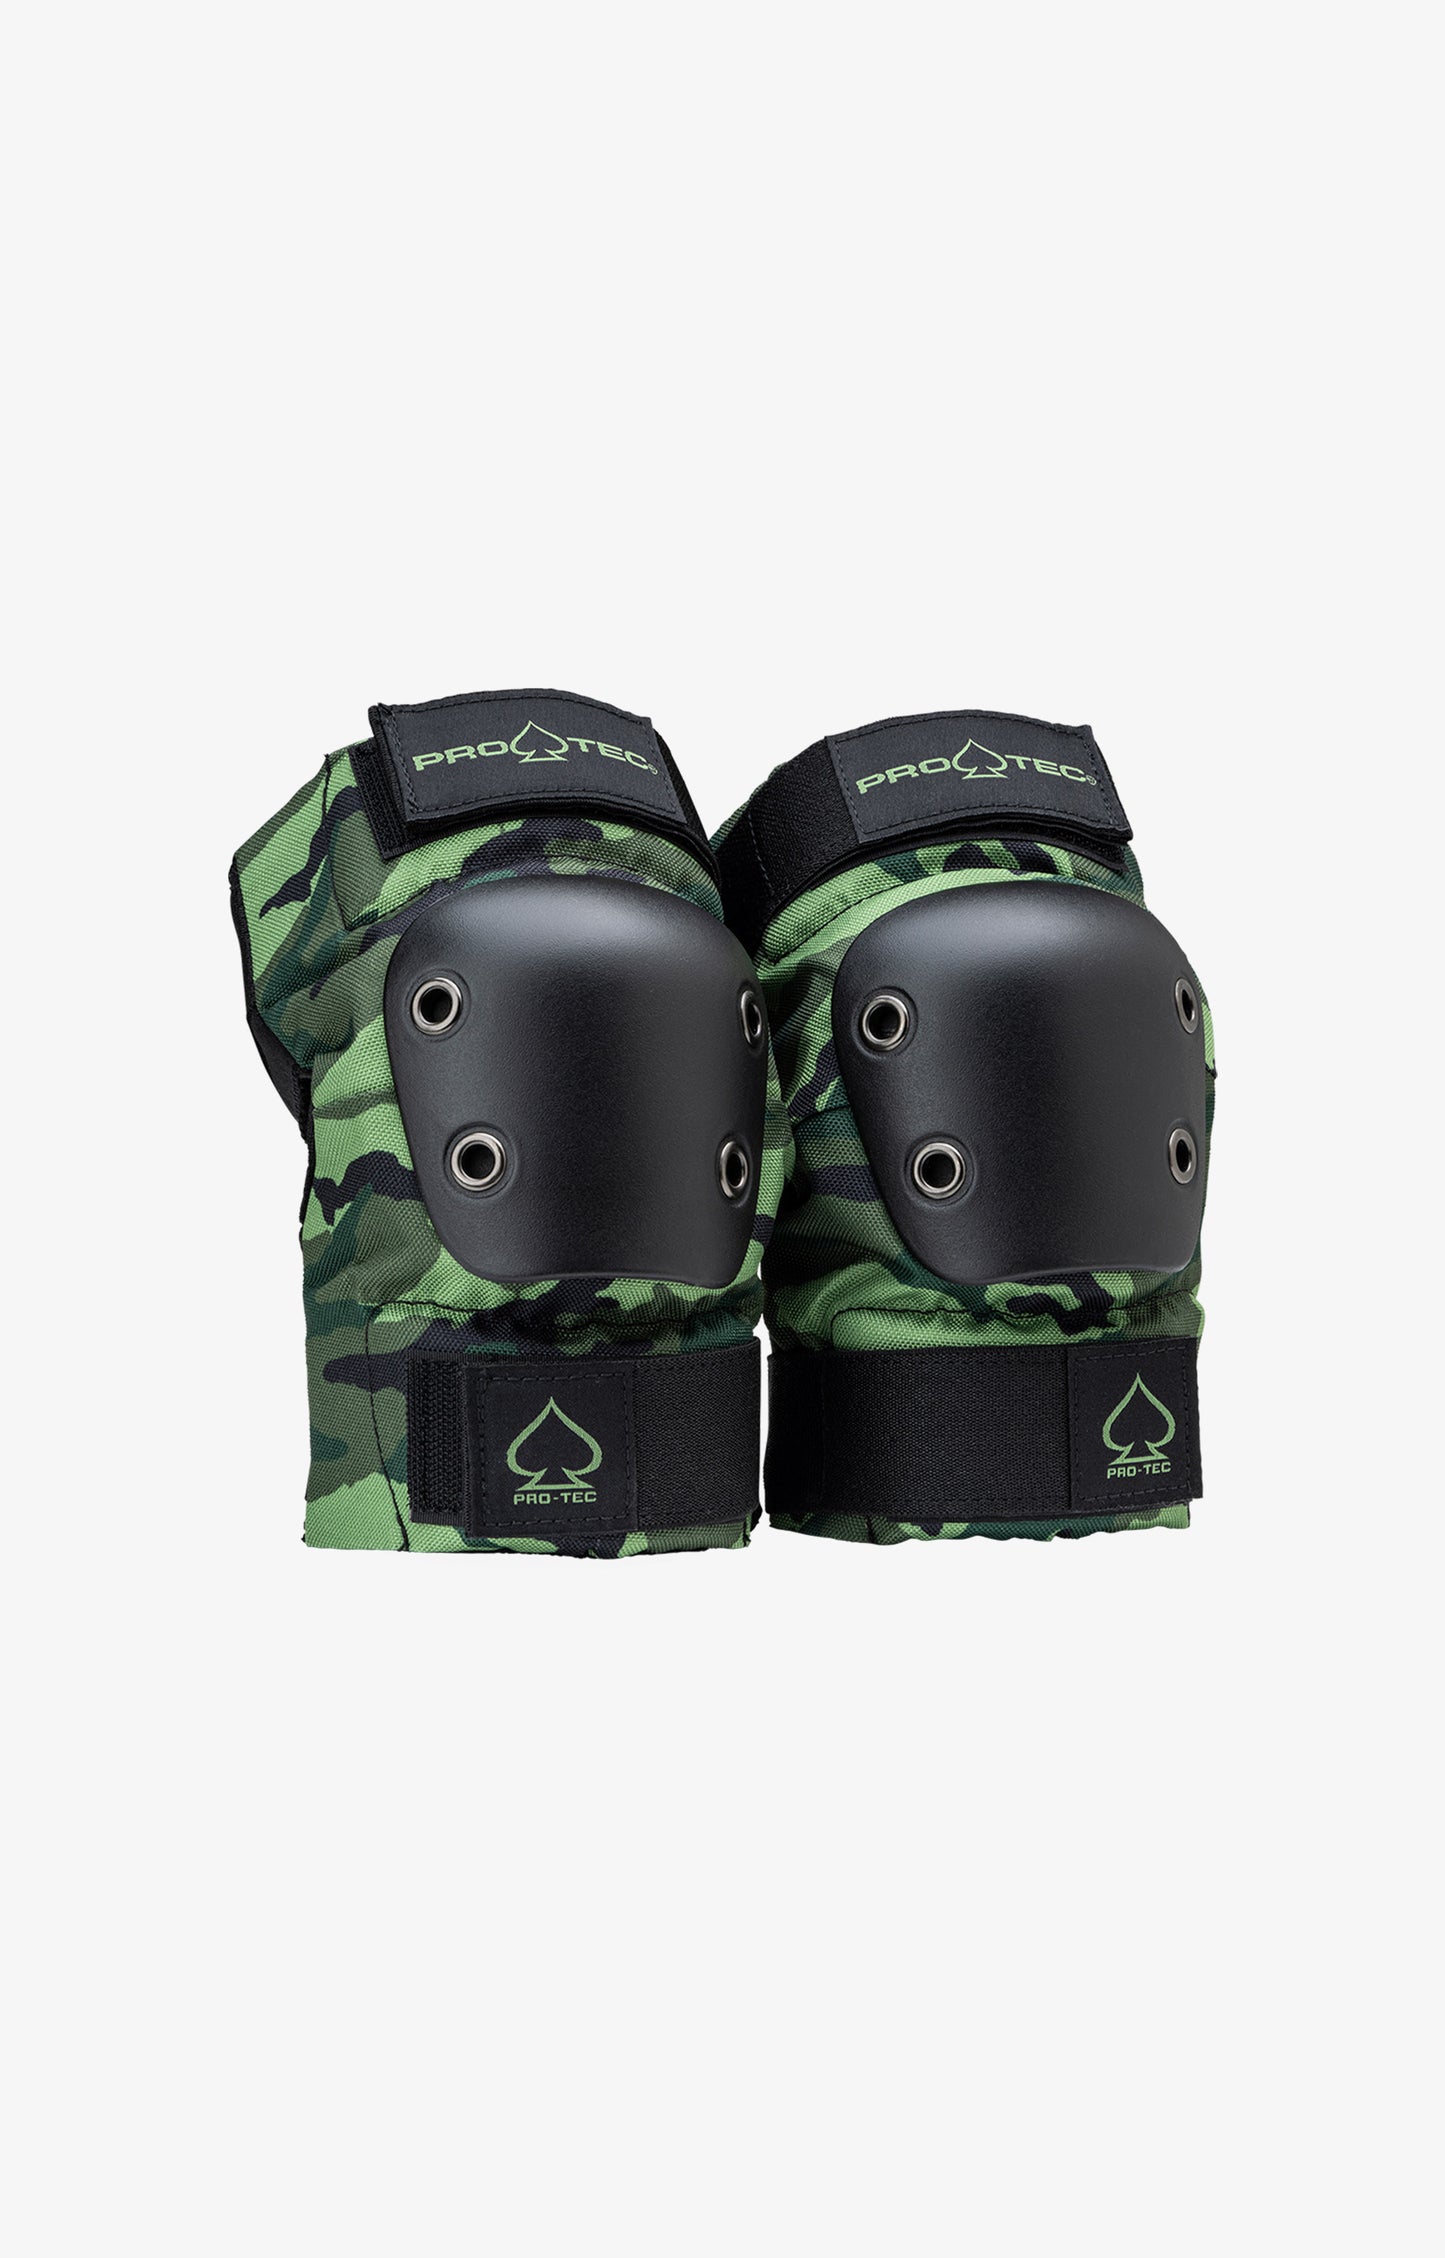 Pro-Tec Street Junior Protective 3 Pack Wrist Guards and Pads, Camo